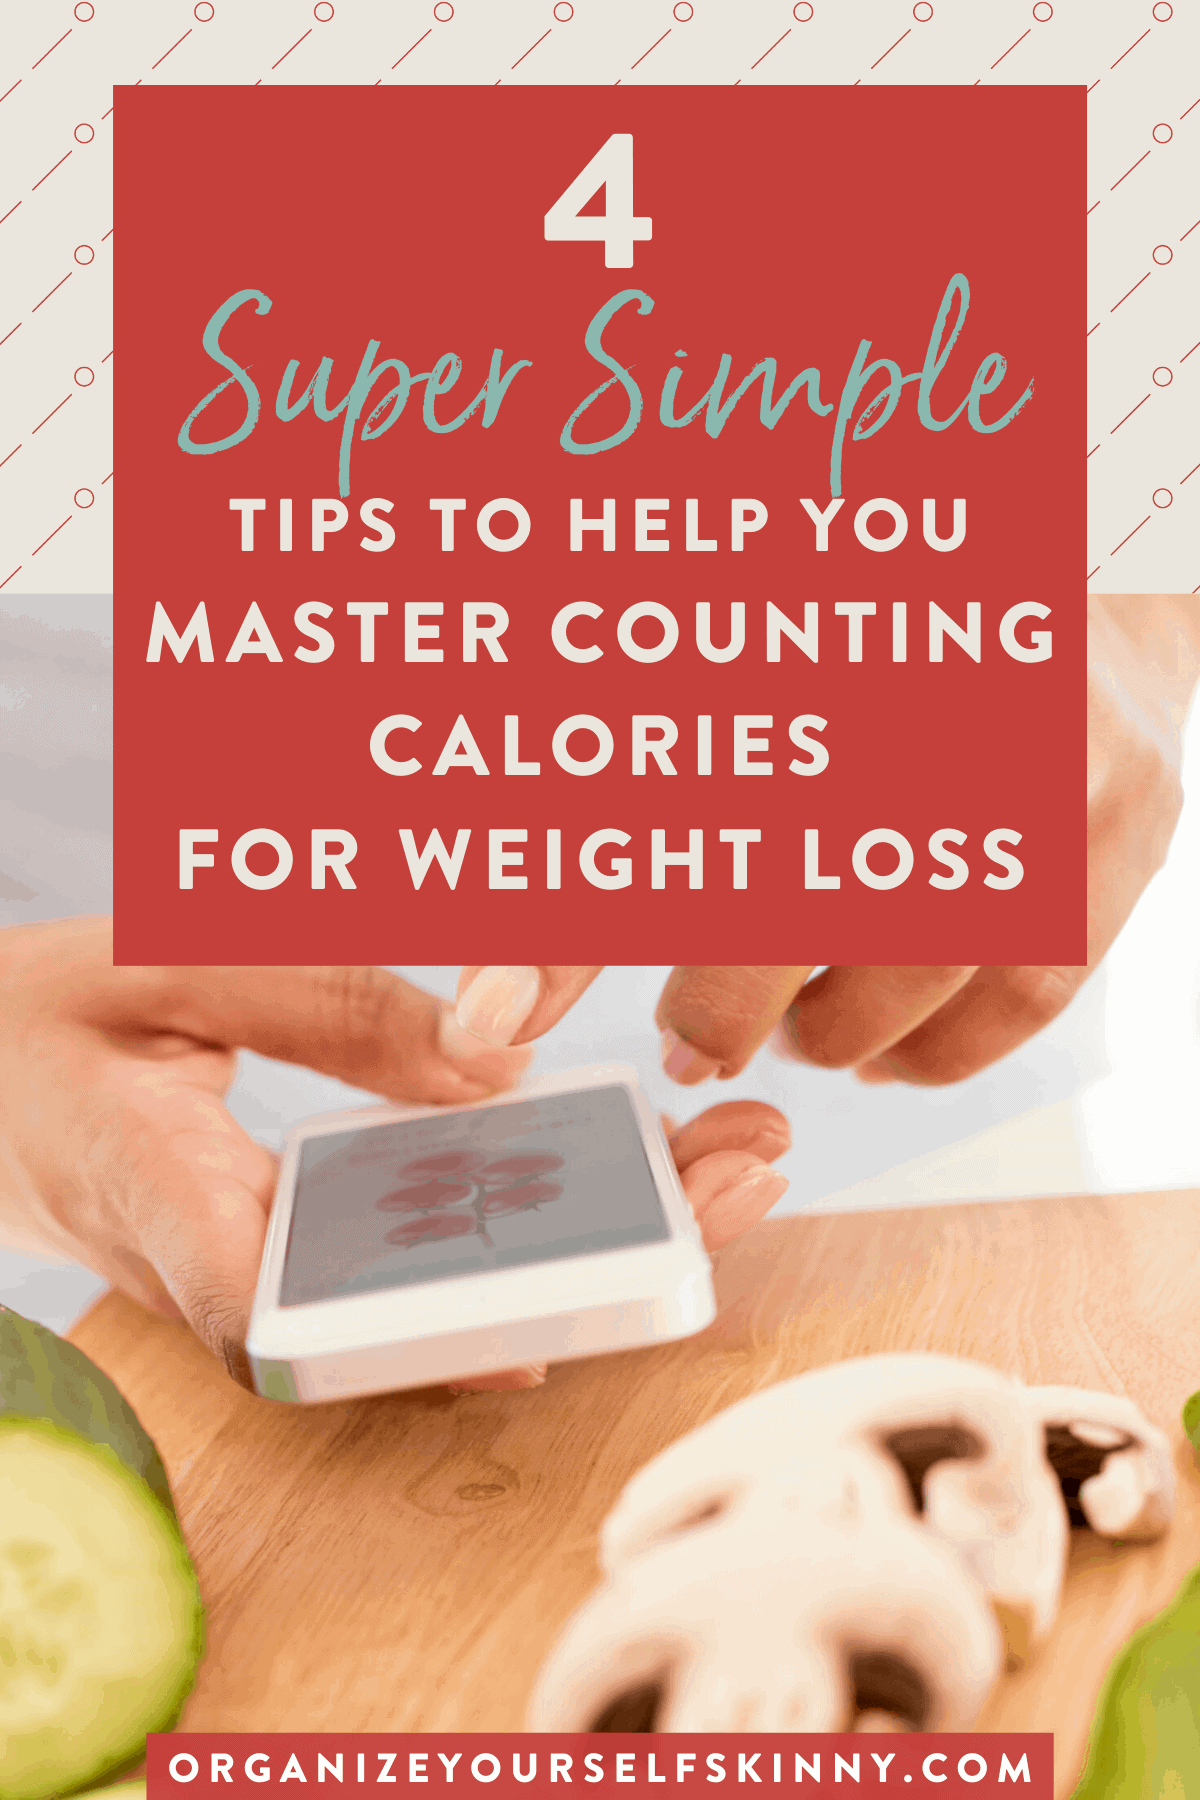 Calorie Counting: Everything You Need to Know